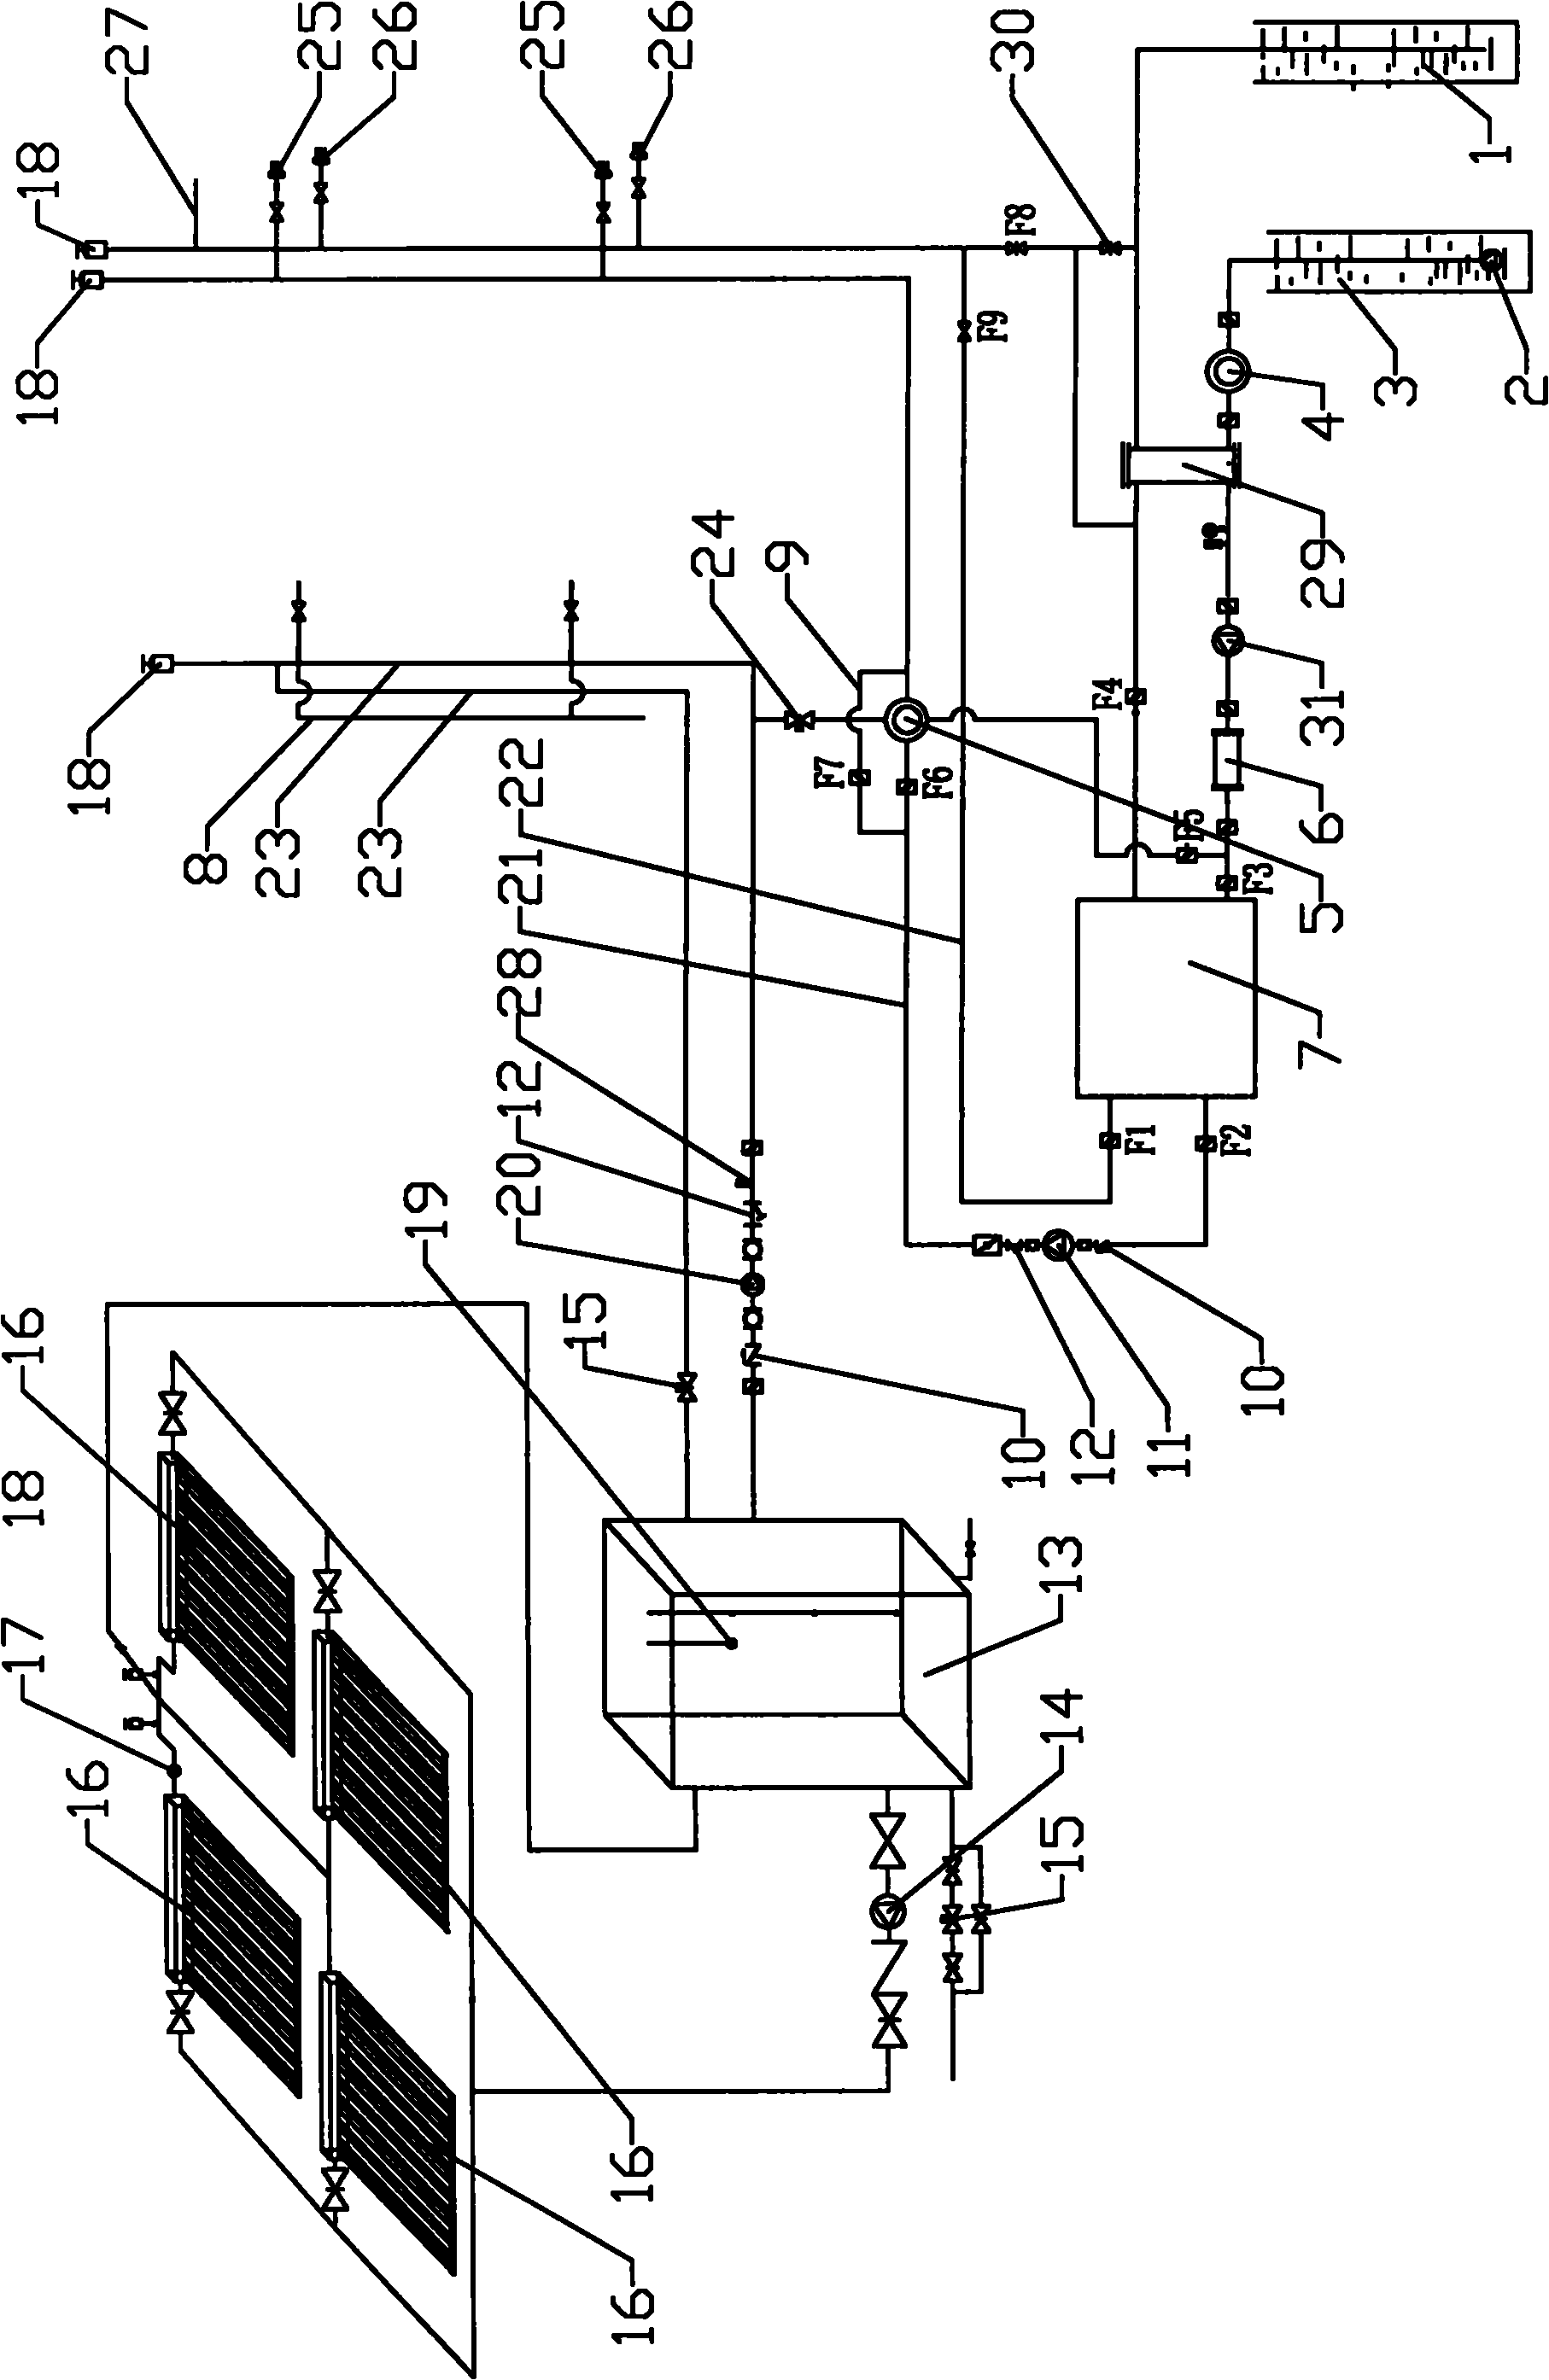 Low-temperature floor radiation heating and refrigerating system device